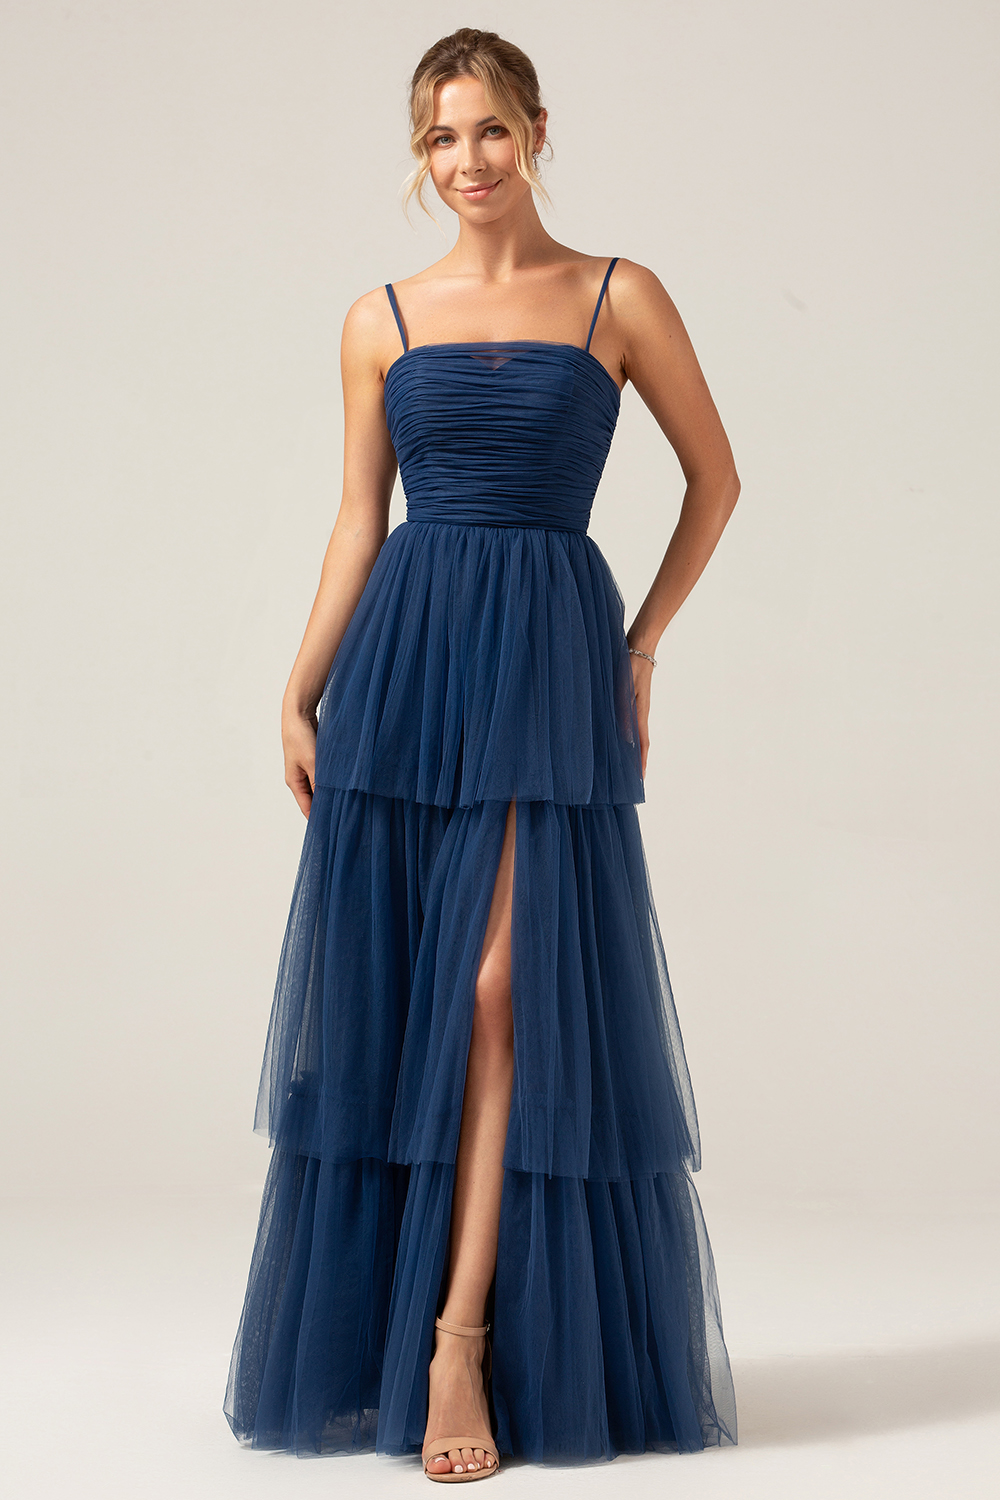 Leely Women Navy A Line Bridesmaid Dress Tulle Spaghetti Straps Long Tiered Pleated Wedding Guest Dress with Slit